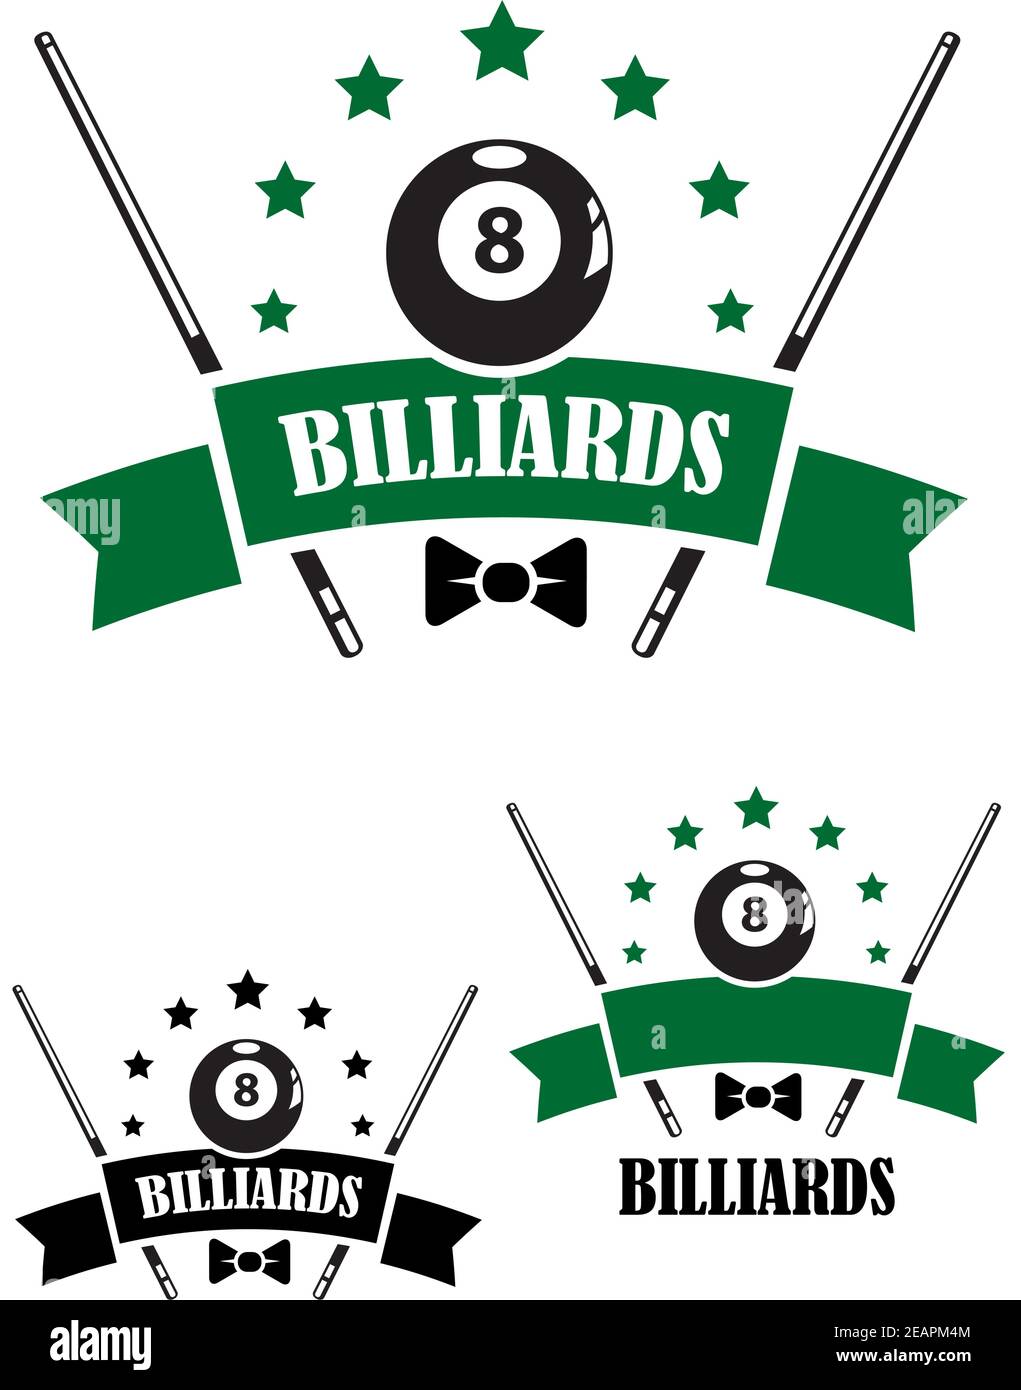 Retro style emblem of snooker and billiards with a ball, bow tie, stars and cues. For sporting  and logo design Stock Vector